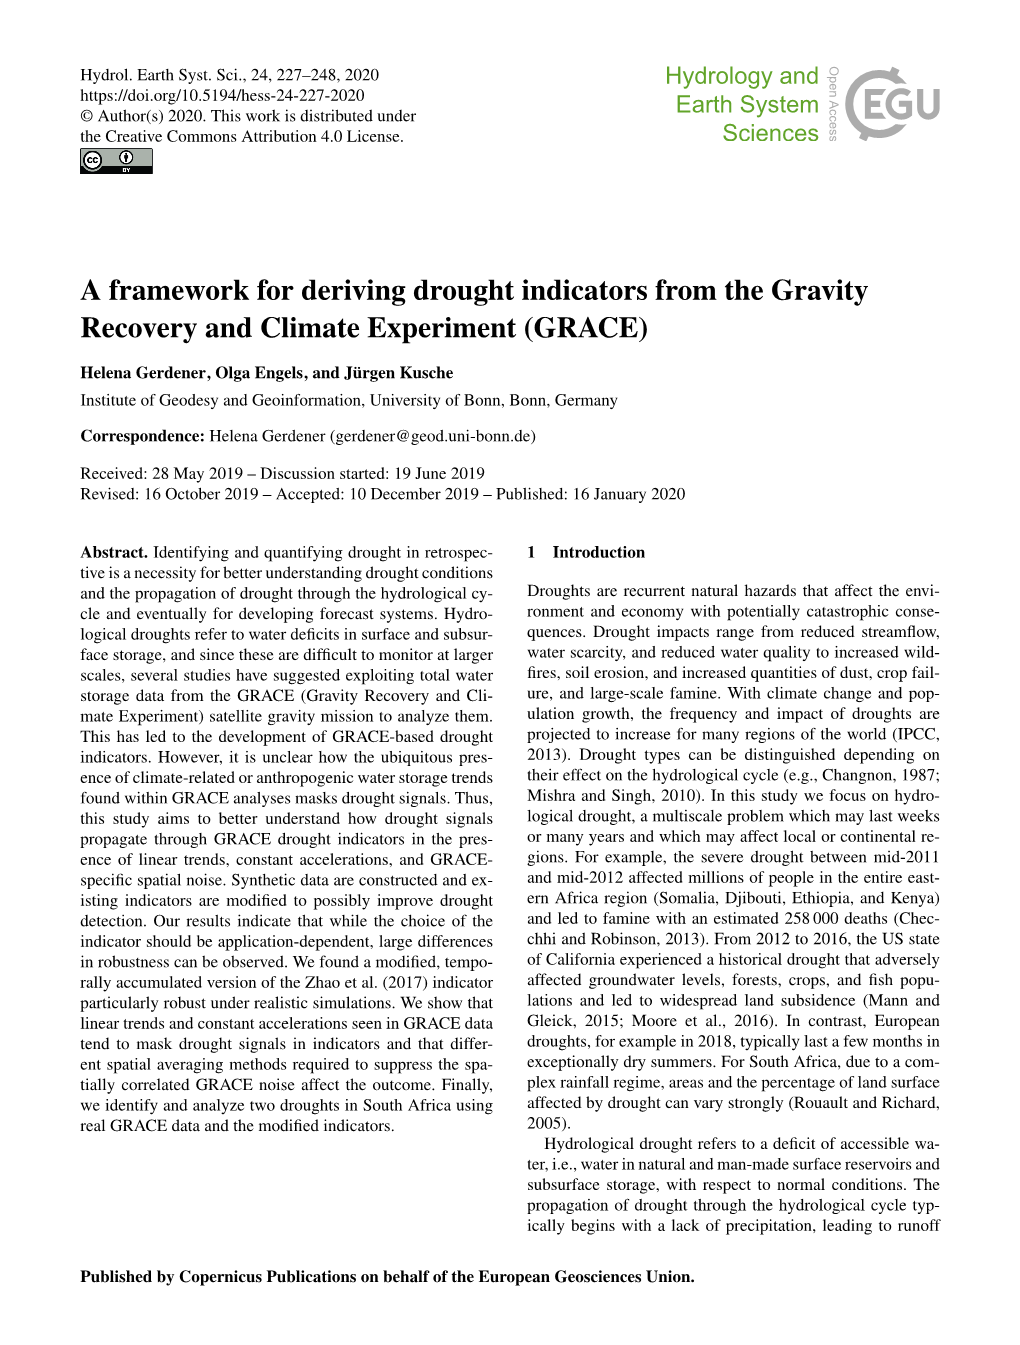 A Framework for Deriving Drought Indicators from the Gravity Recovery and Climate Experiment (GRACE)